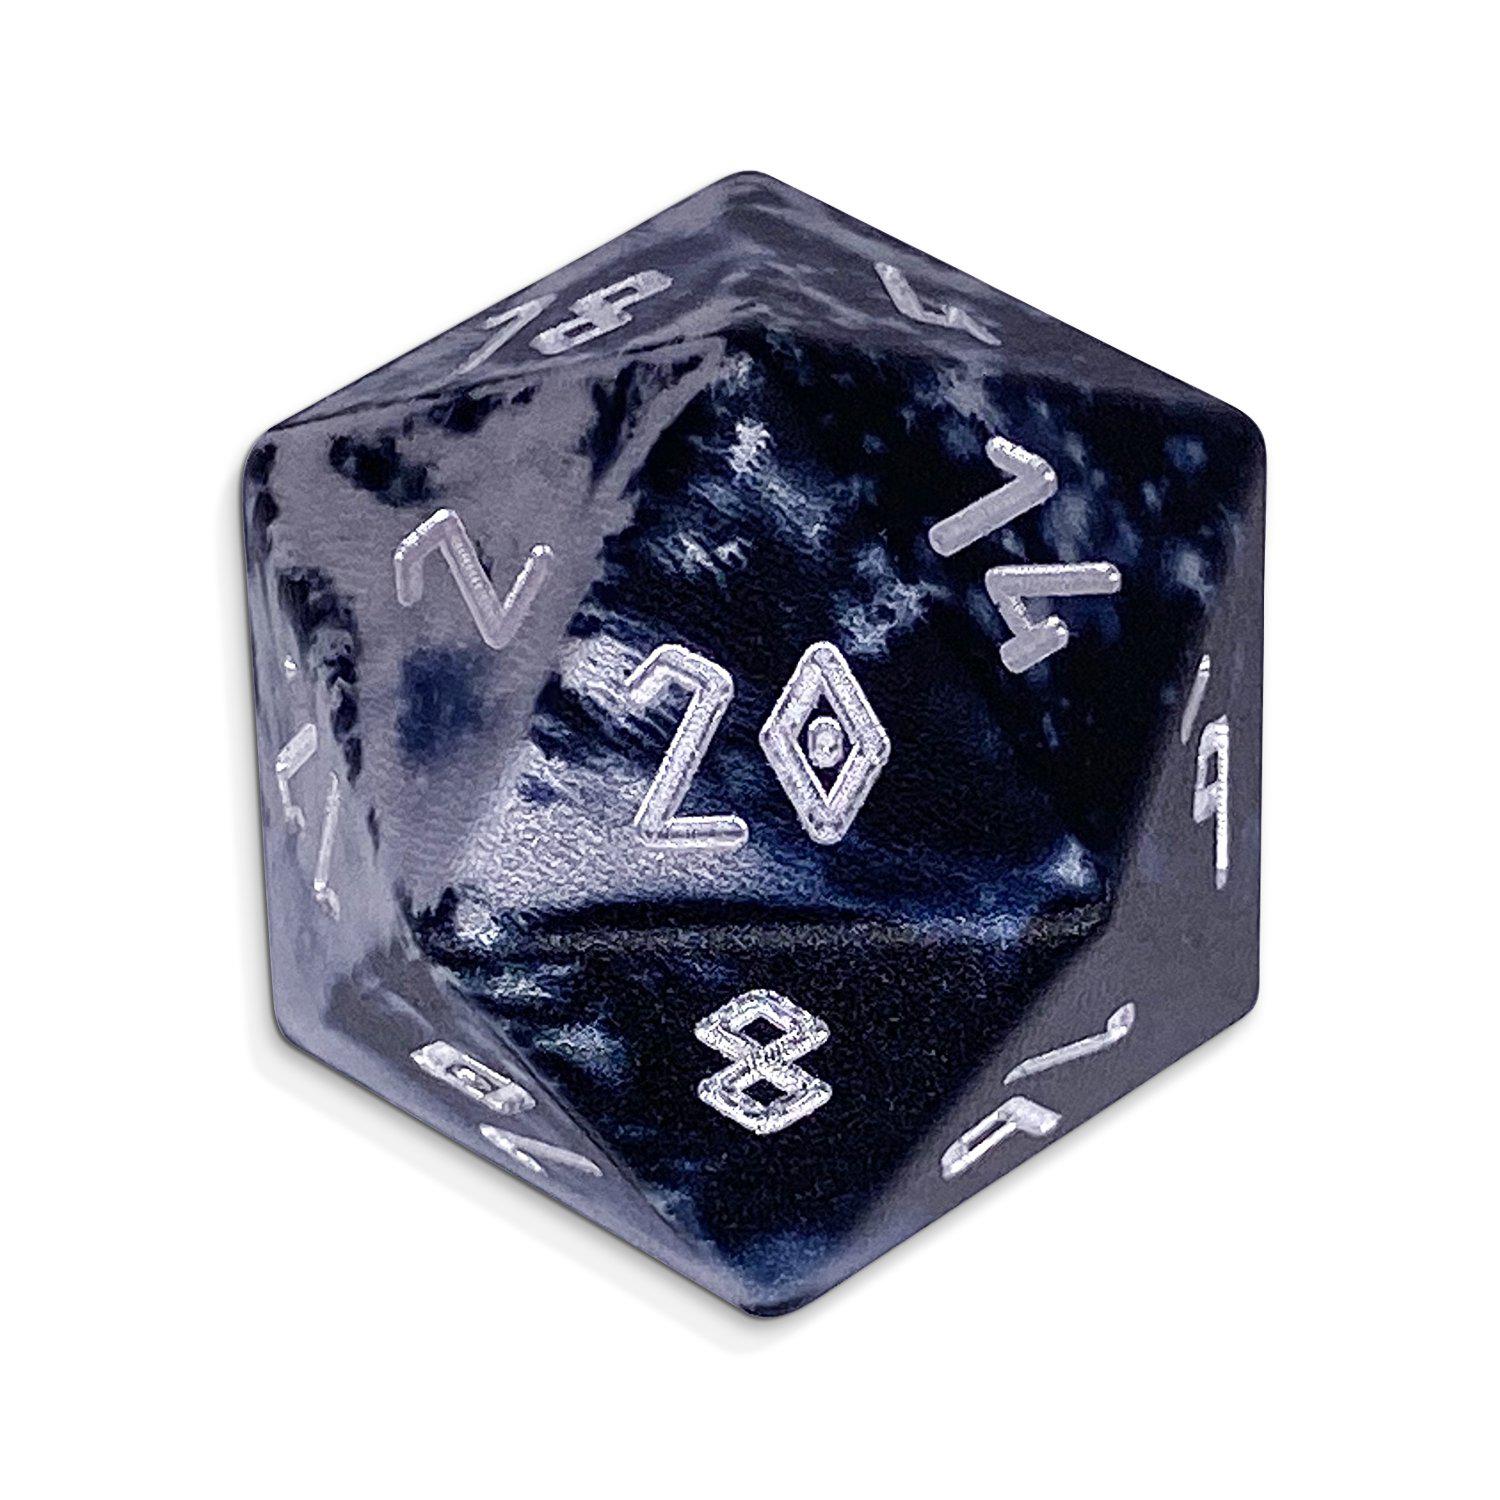 Single Wondrous Dice® D20 in Mummy Lord by Norse Foundry® 6063 Aircraft Grade Aluminum